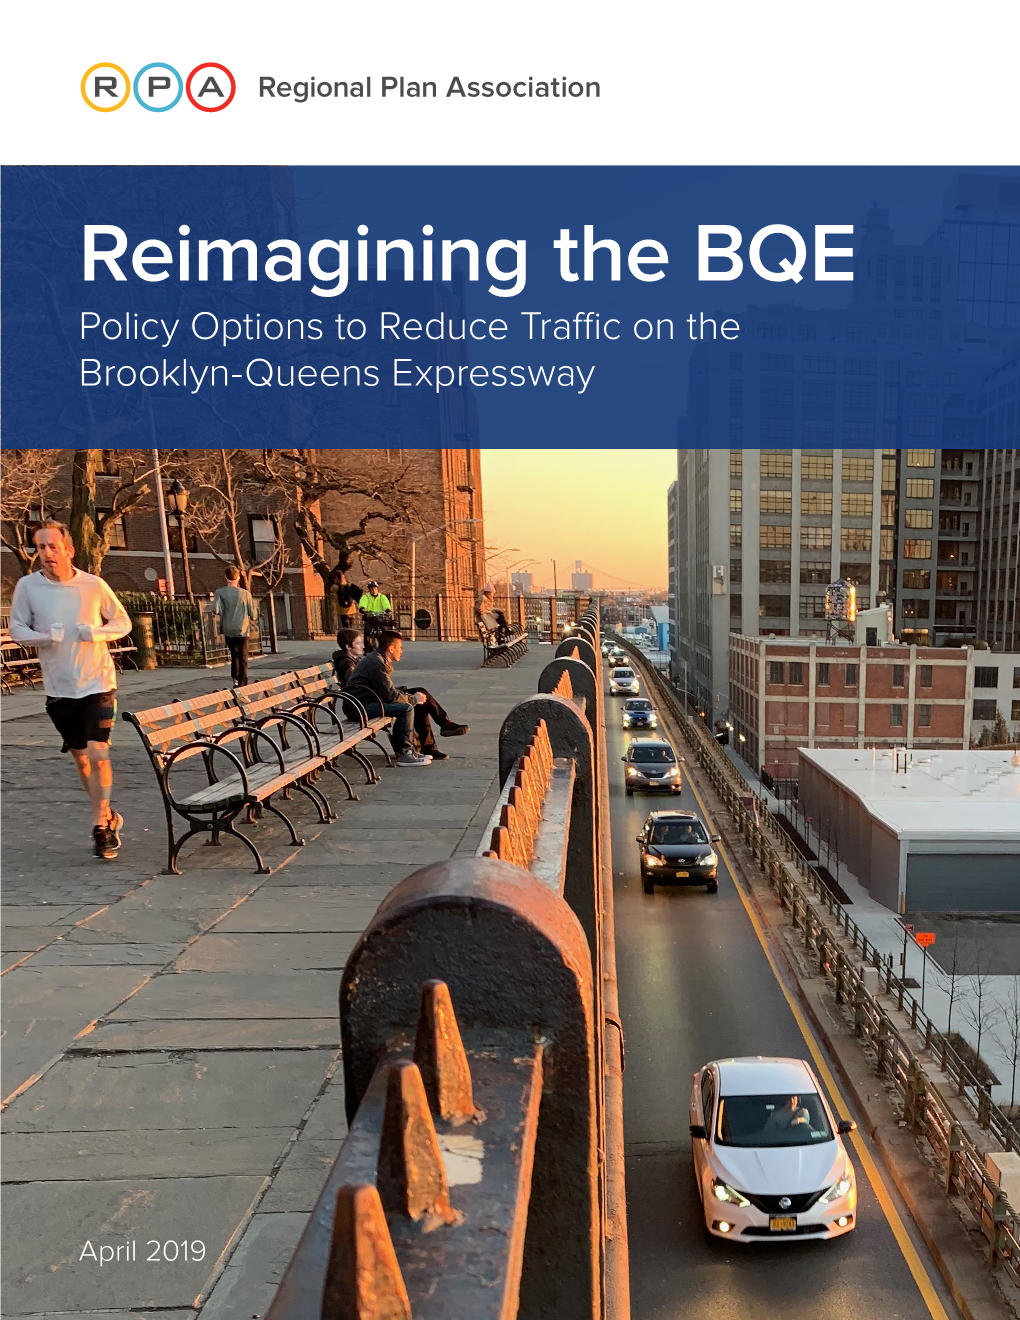 Reimagining the BQE Policy Options to Reduce Traffic on the Brooklyn-Queens Expressway